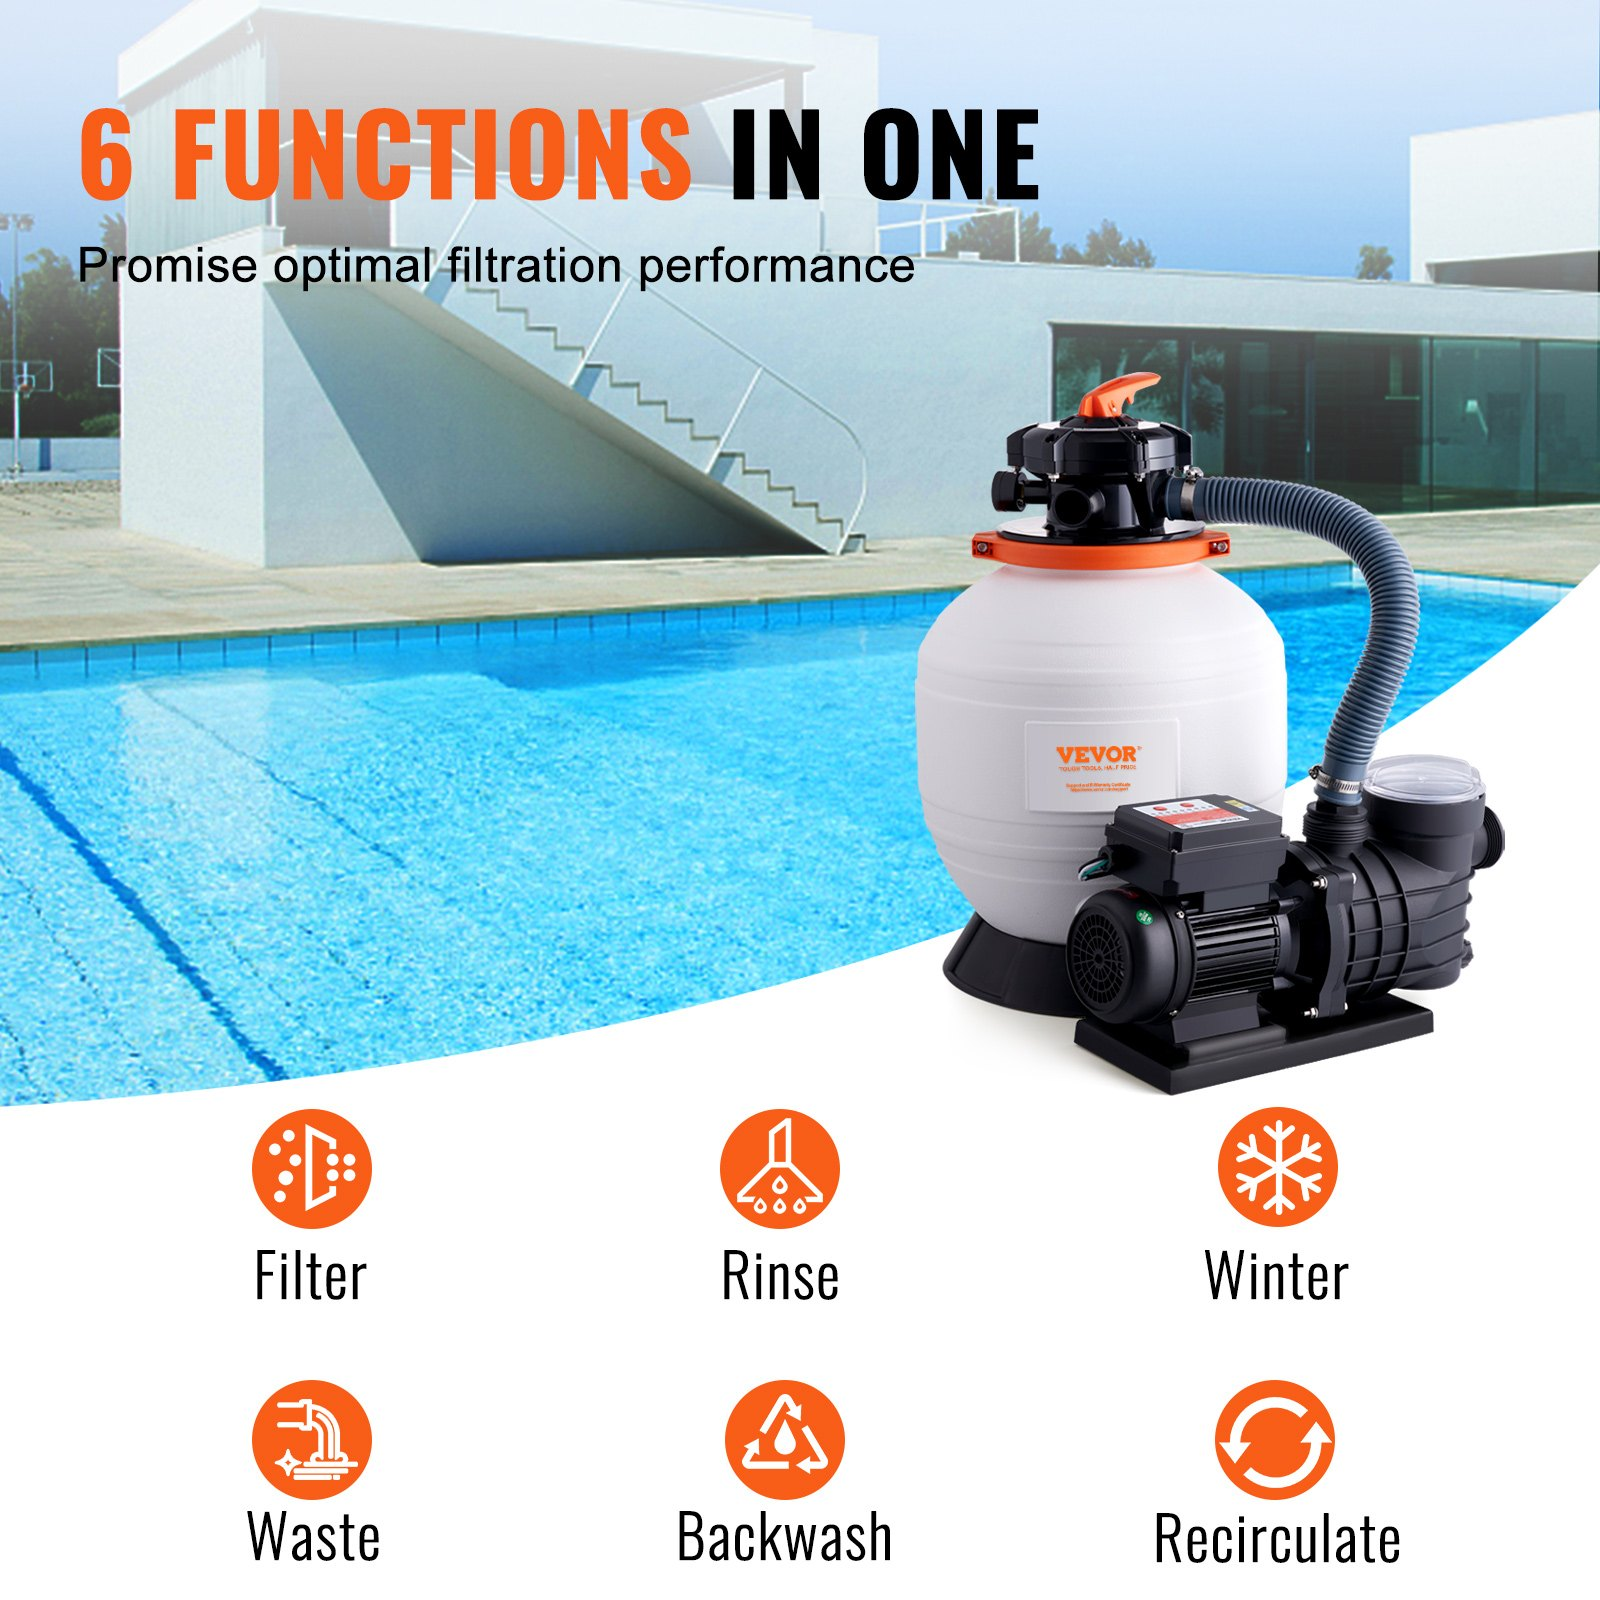 VEVOR Sand Filter Pump for Above Ground Pools, 14-inch, 3000 GPH, 3/4 HP Swimming Pool Pumps System & Filters Combo Set with 6-Way Multi-Port Valve & Strainer Basket, for Domestic and Commercial Pools, Goodies N Stuff